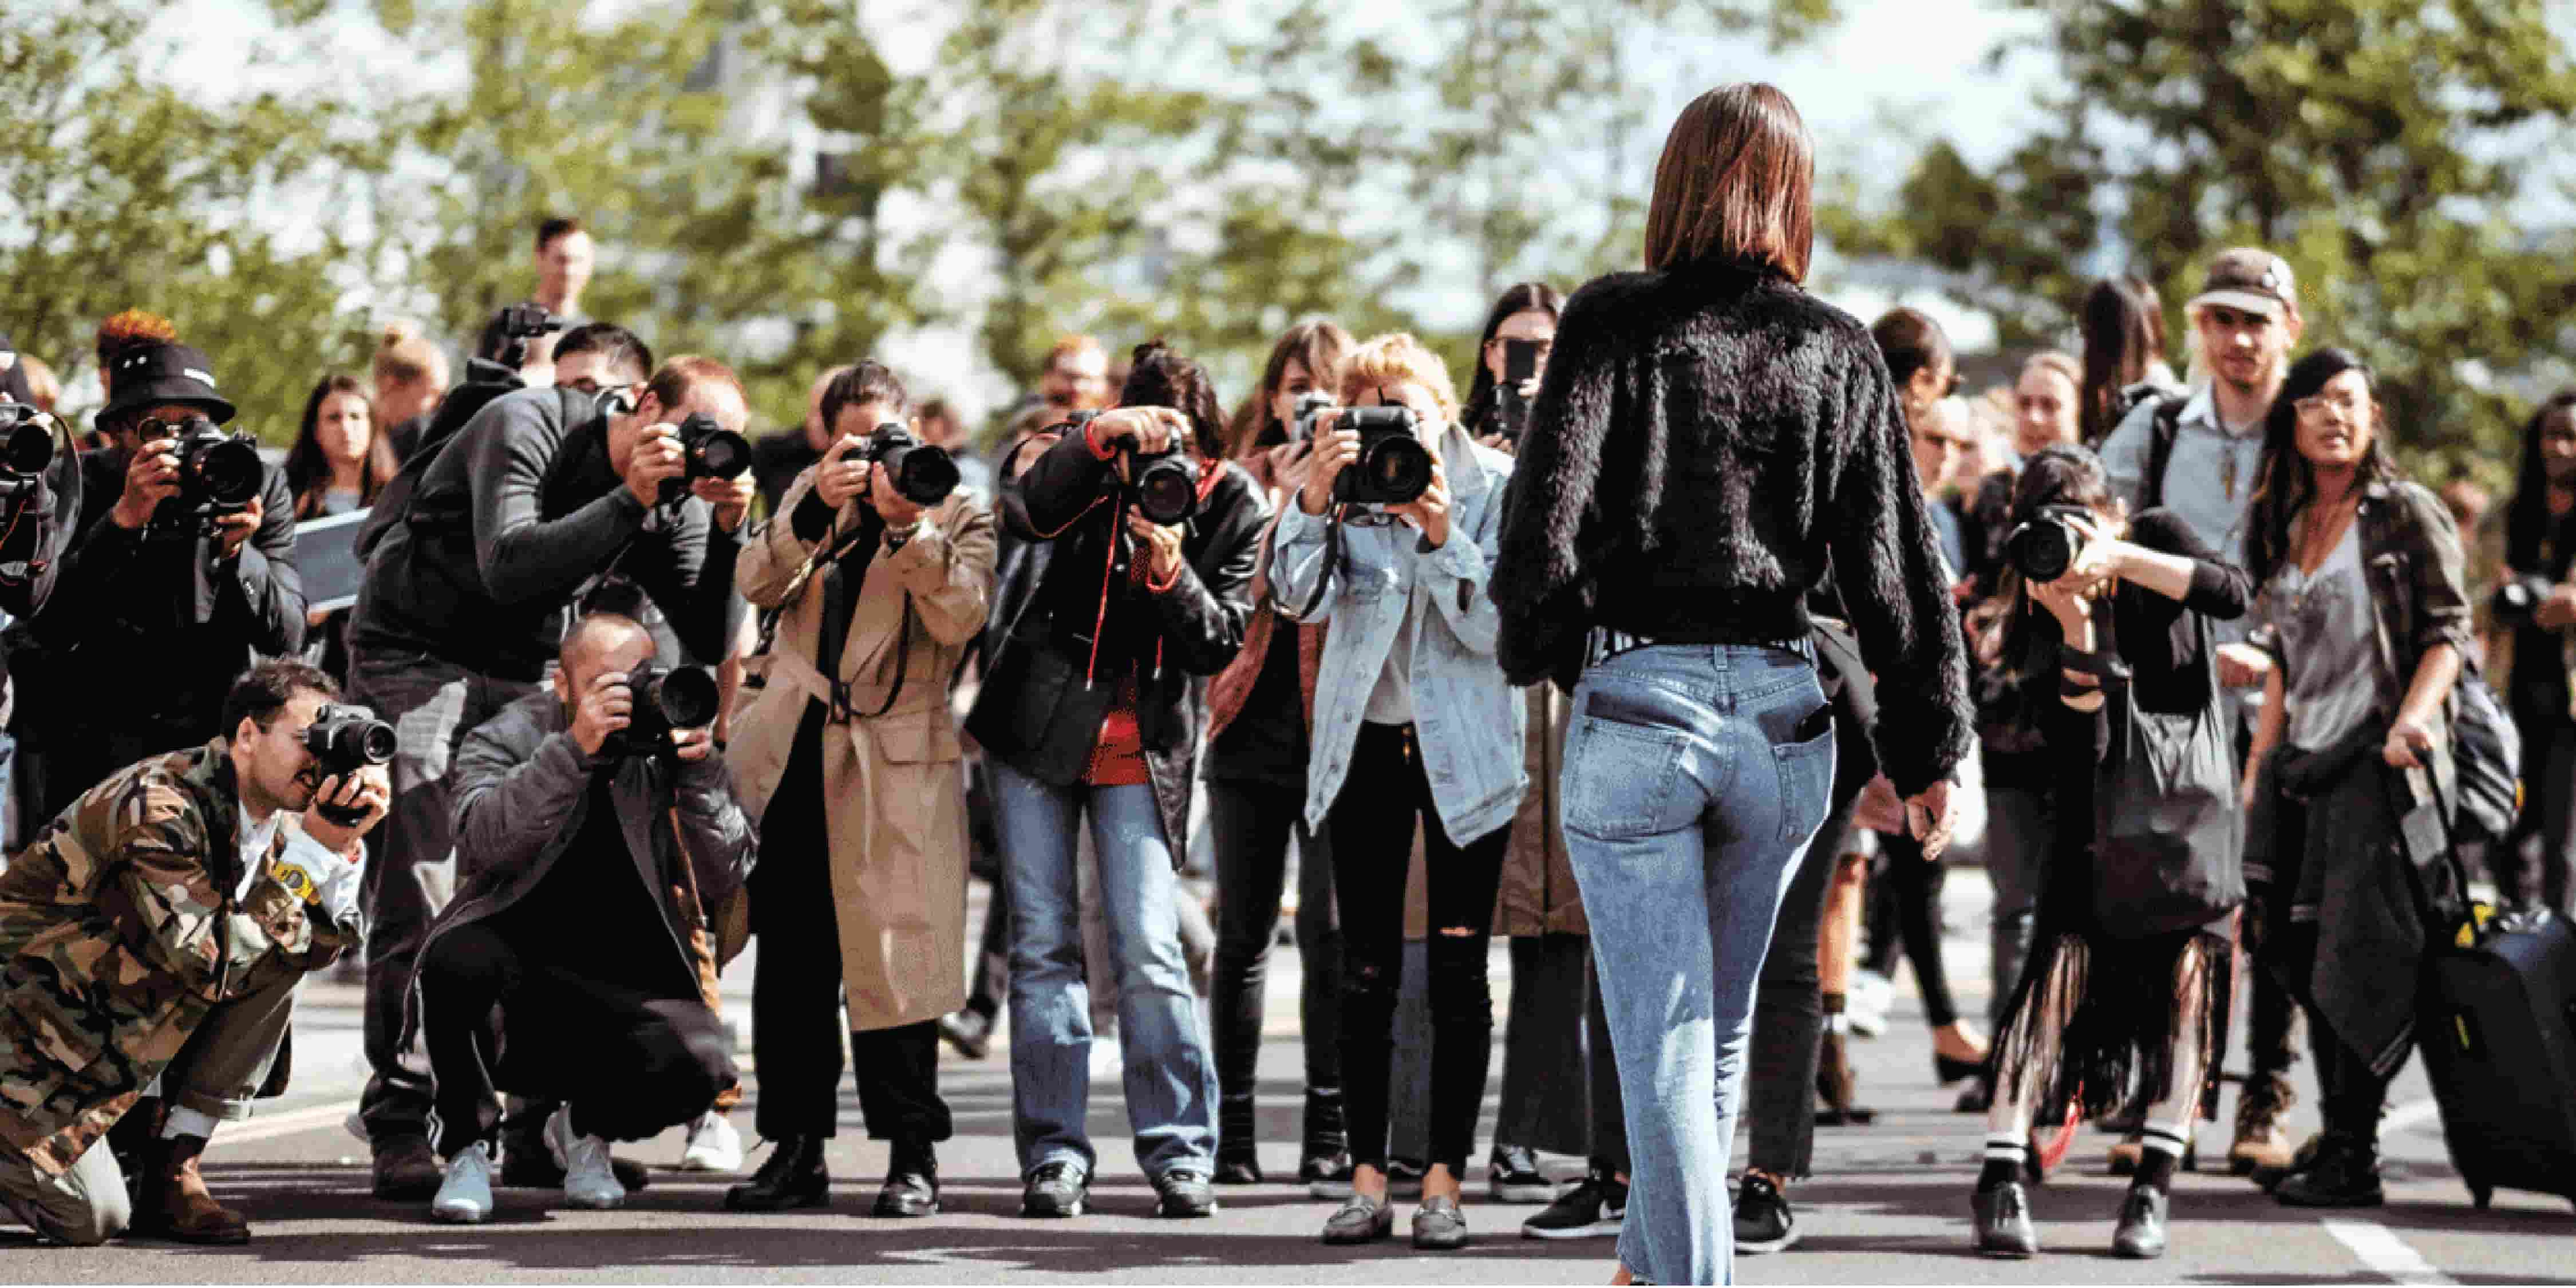 Woman influencer in front of photographers